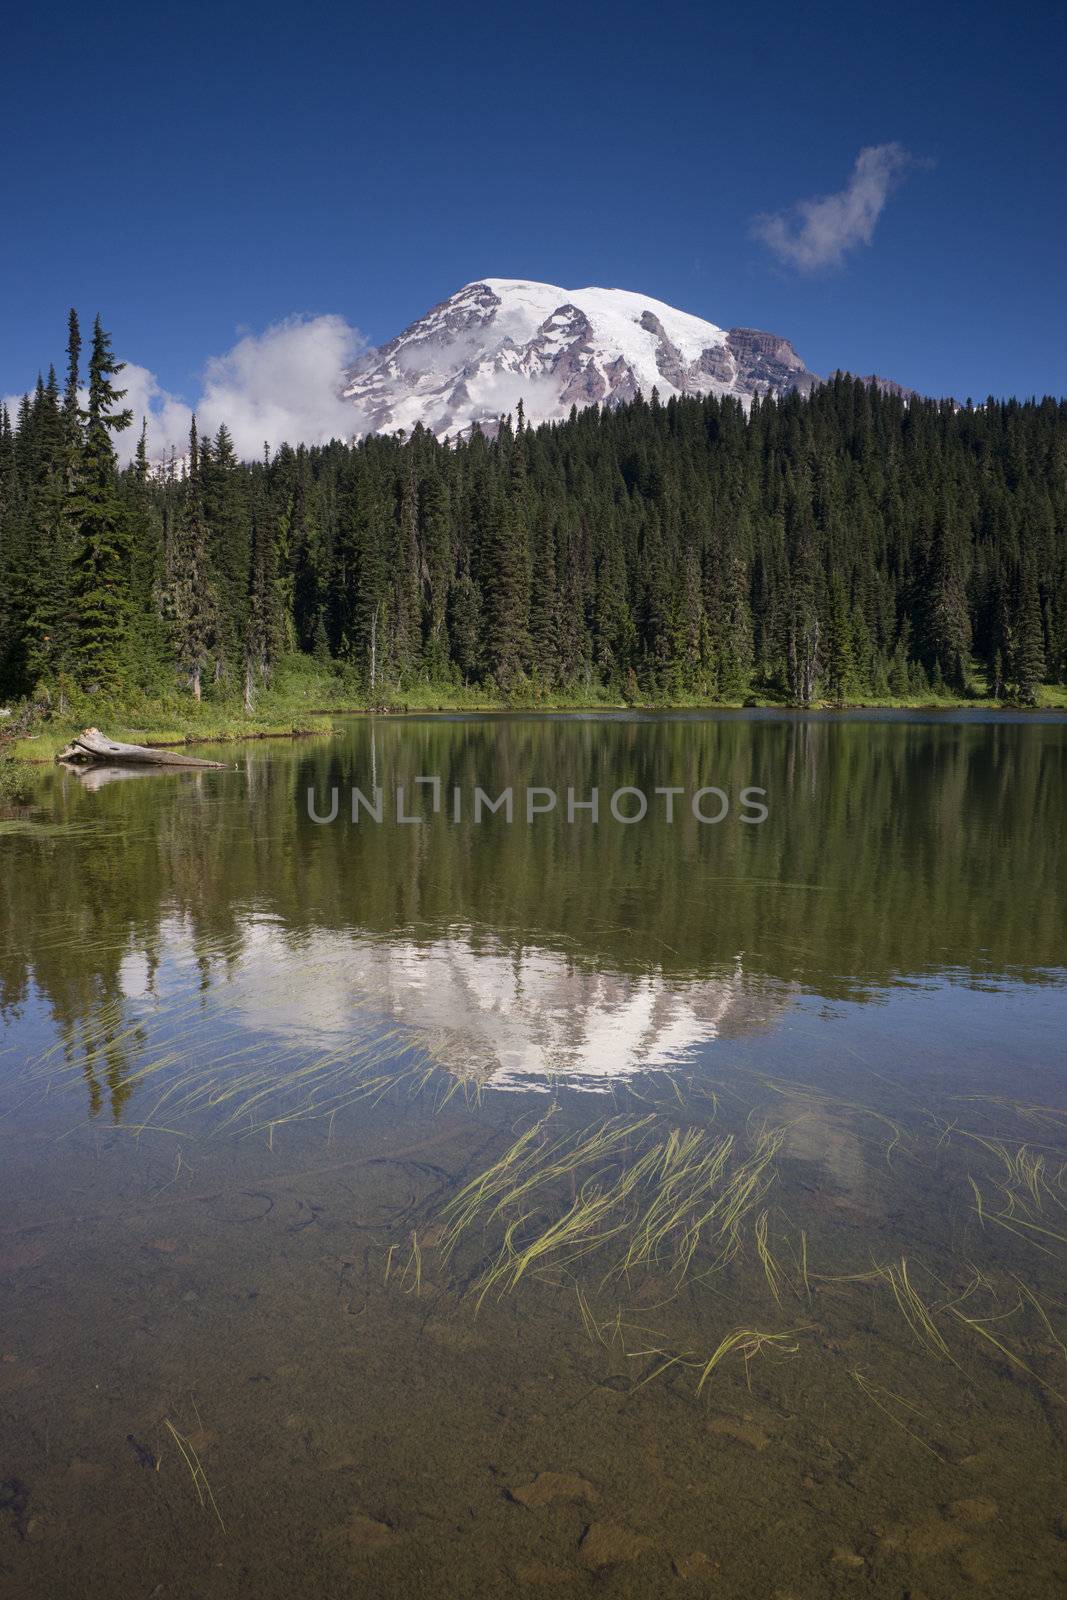 Mt. Rainier above the water at reflection lake